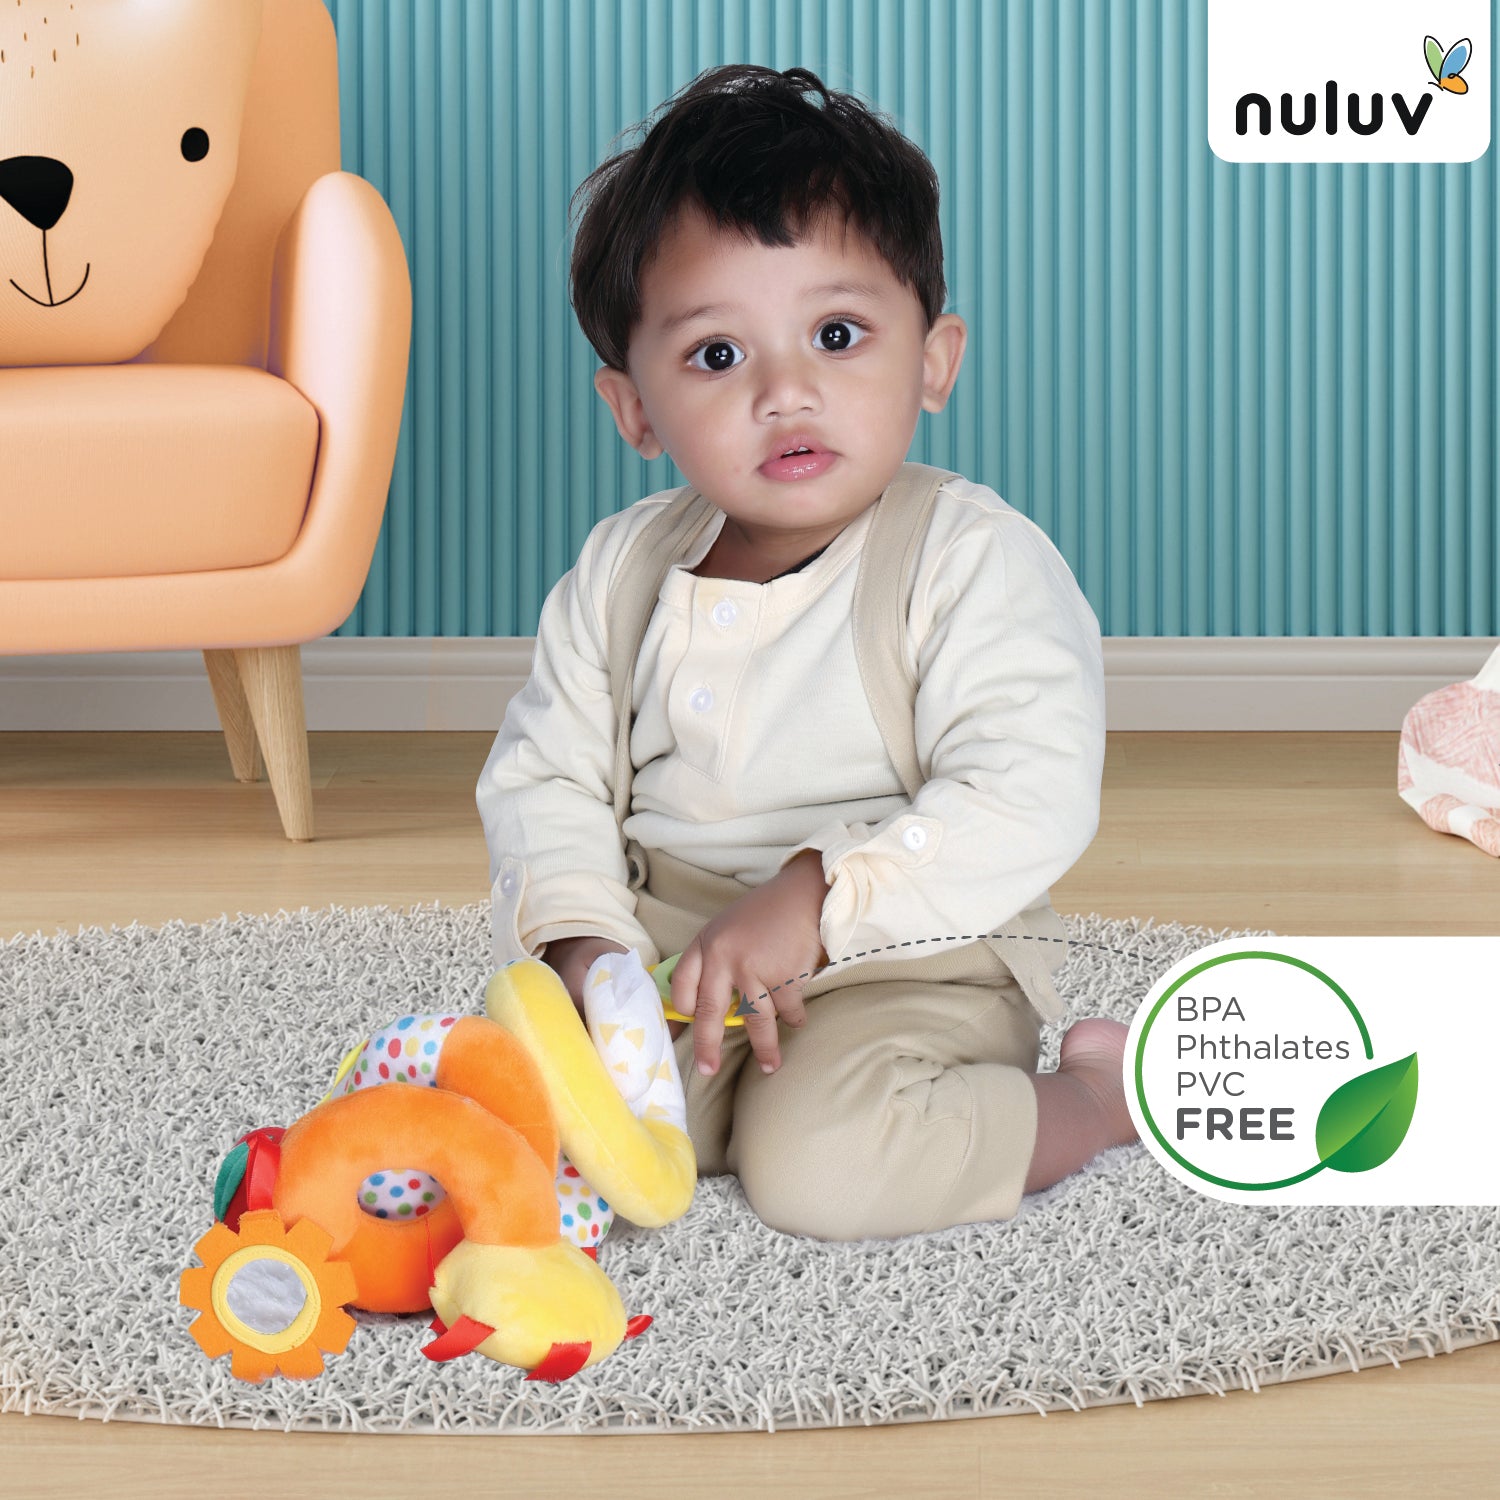 Nuluv Fruits Spiral Stroller Toy Stretch Plush Toys, Hanging Rattle Toys For 0 to 12 Months